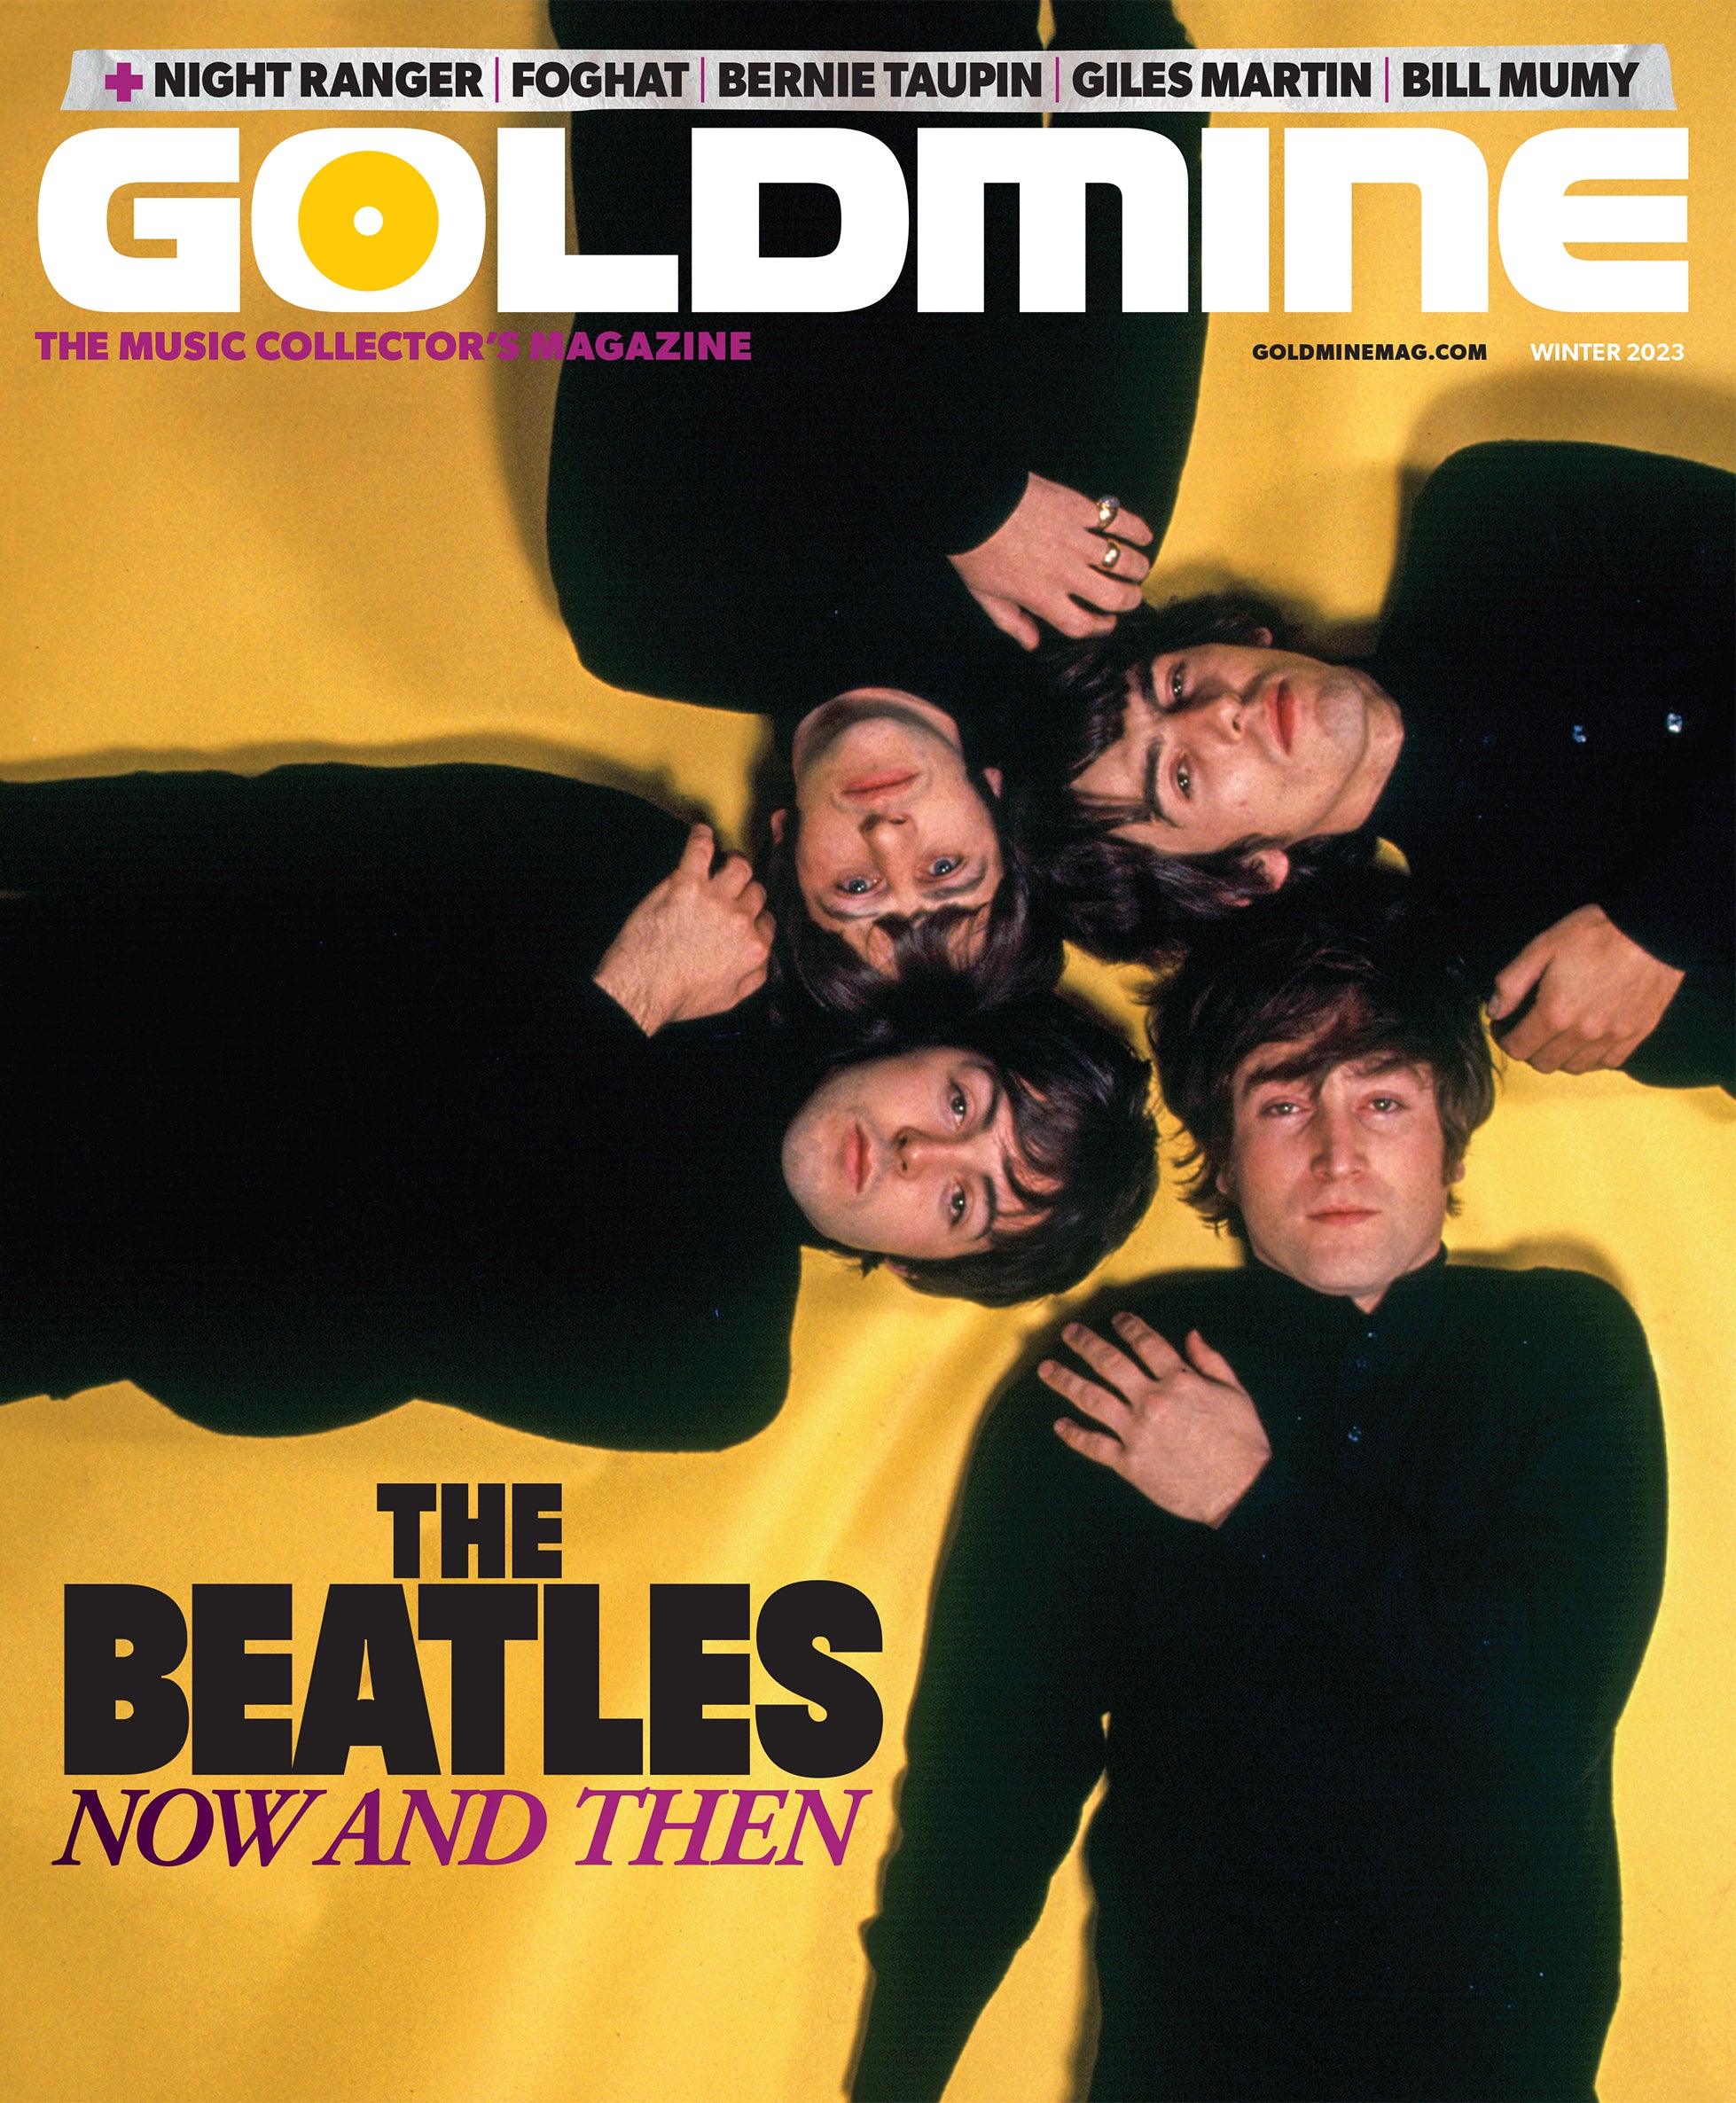 GOLDMINE MAGAZINE: THE BEATLES NOW AND THEN COVER EDITION